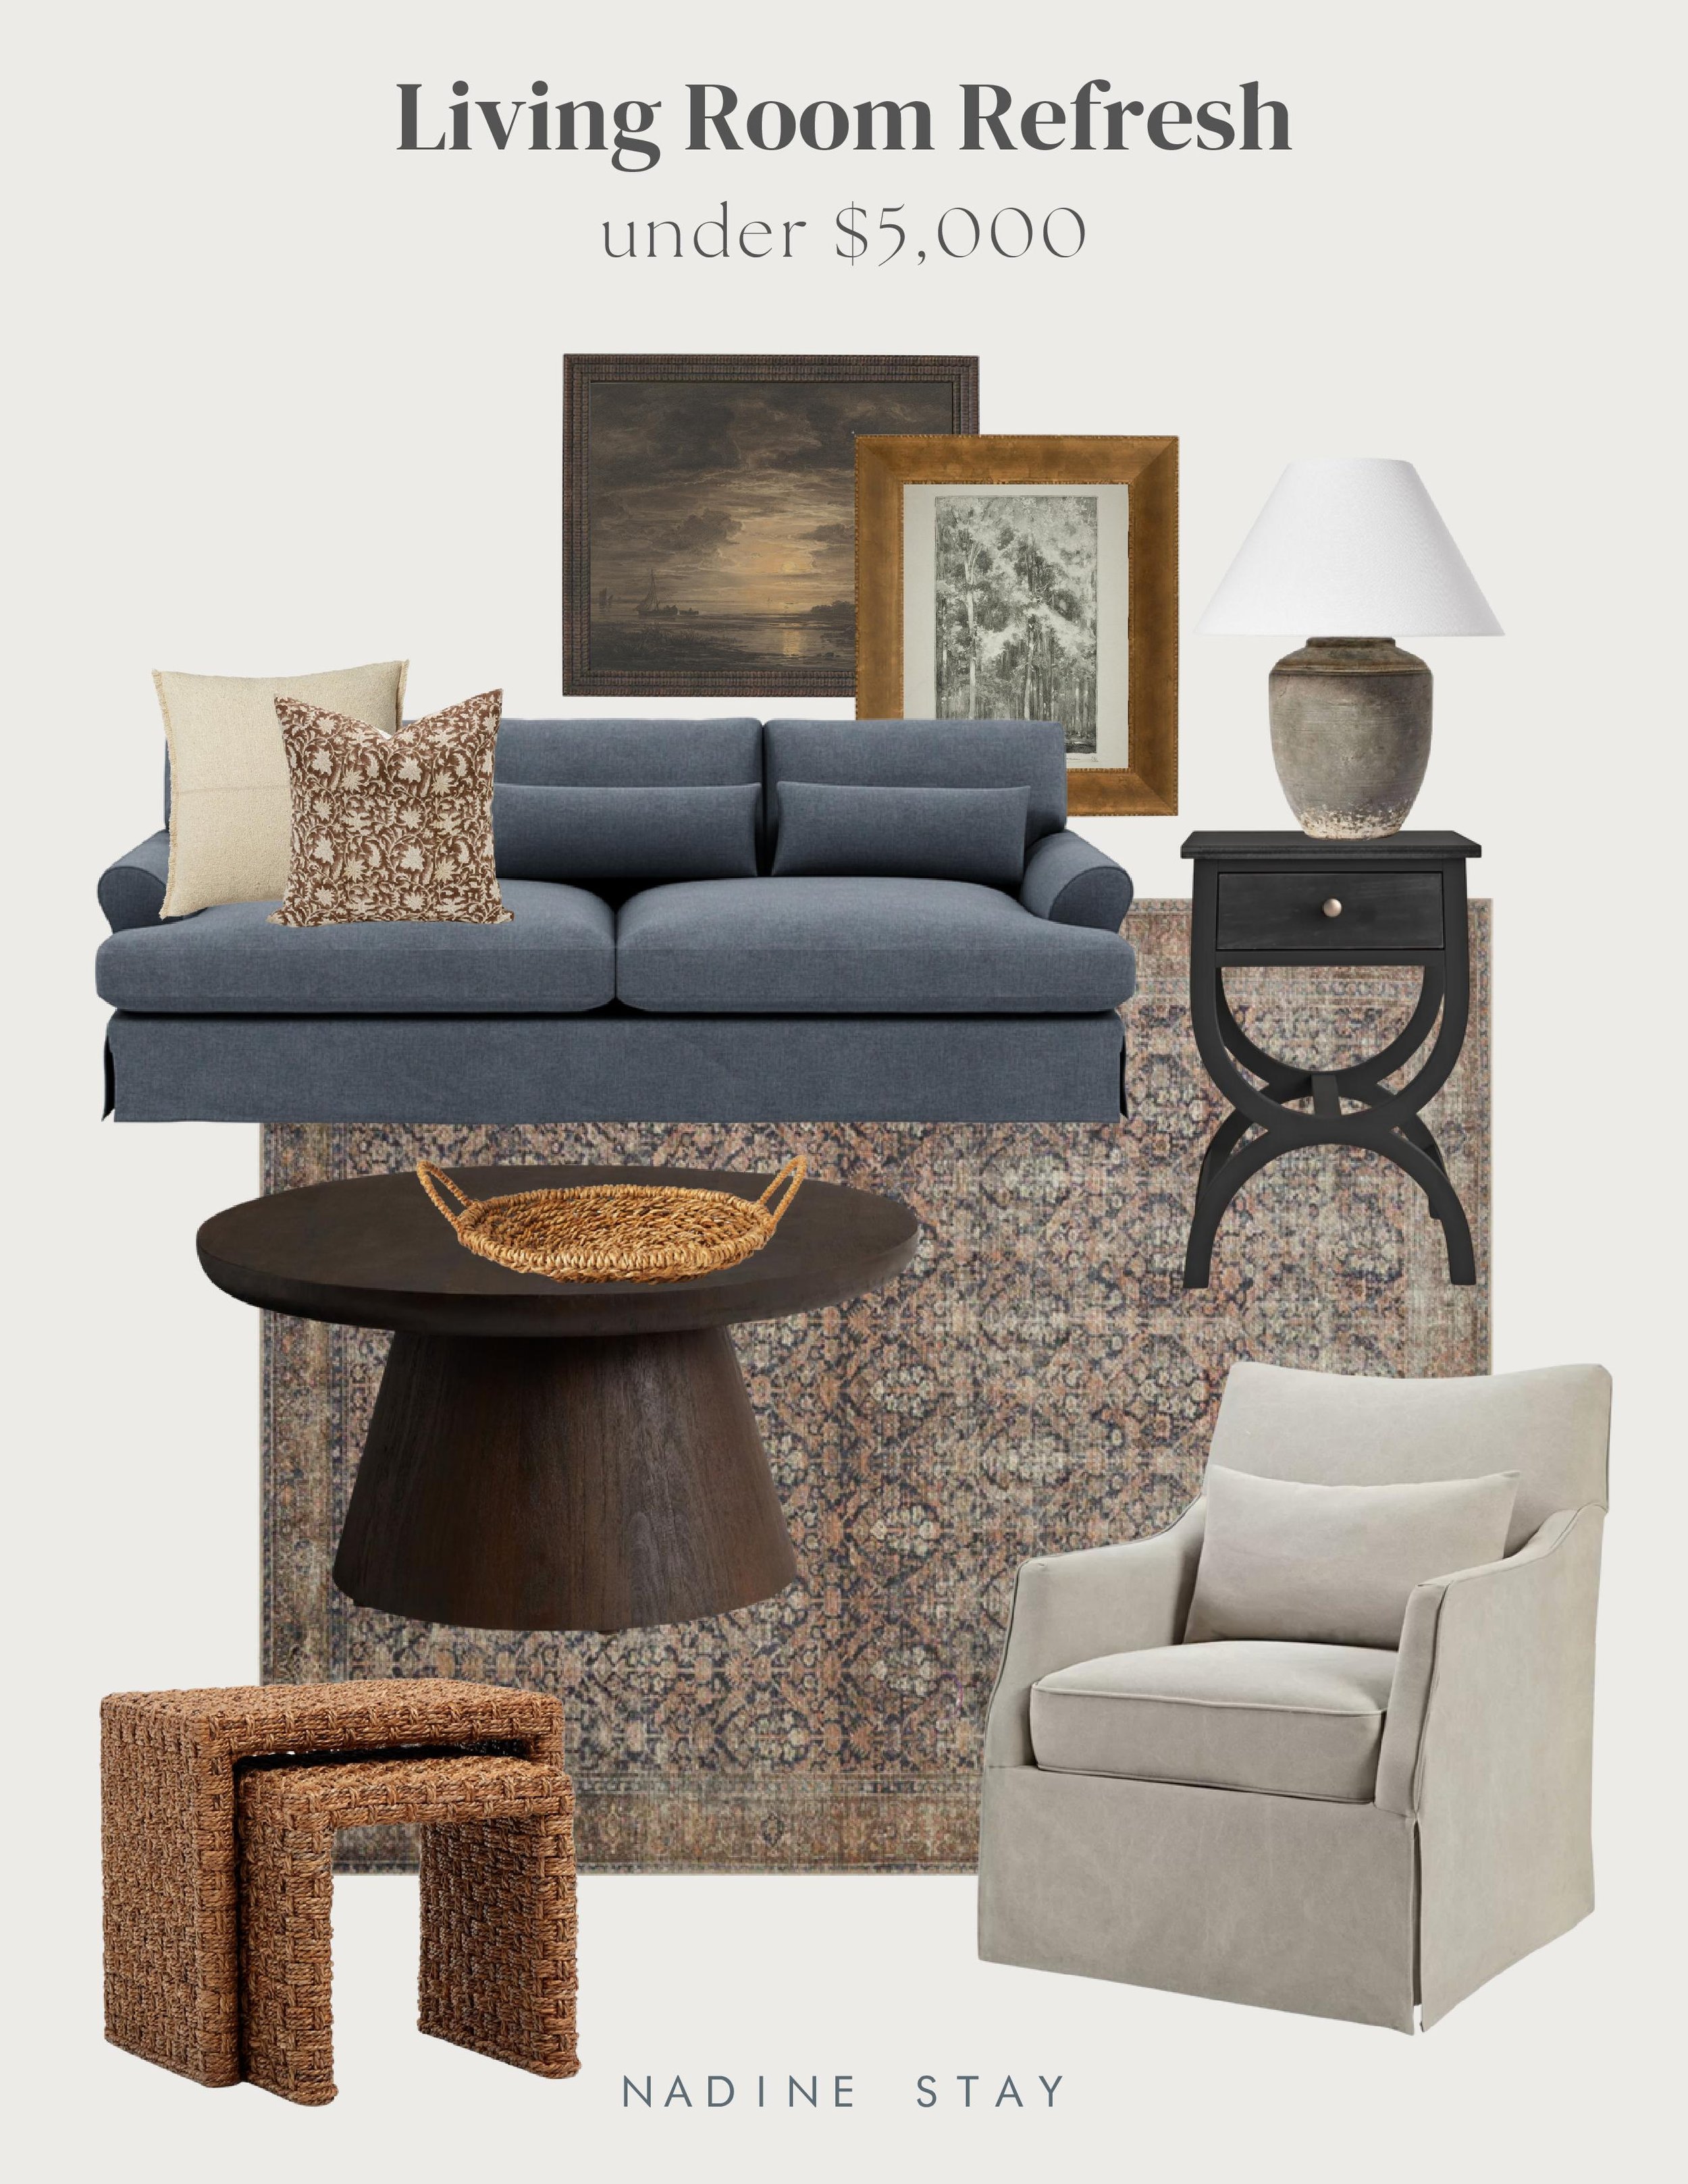 Living Room Refresh Under $5,000 by Nadine Stay | Living room makeover design plan. Blue sofa, dark wood round coffee table. Ivory slipcover armchairs. Billie rug by Amber Interiors x Loloi. California casual living room ideas. Free design plans.